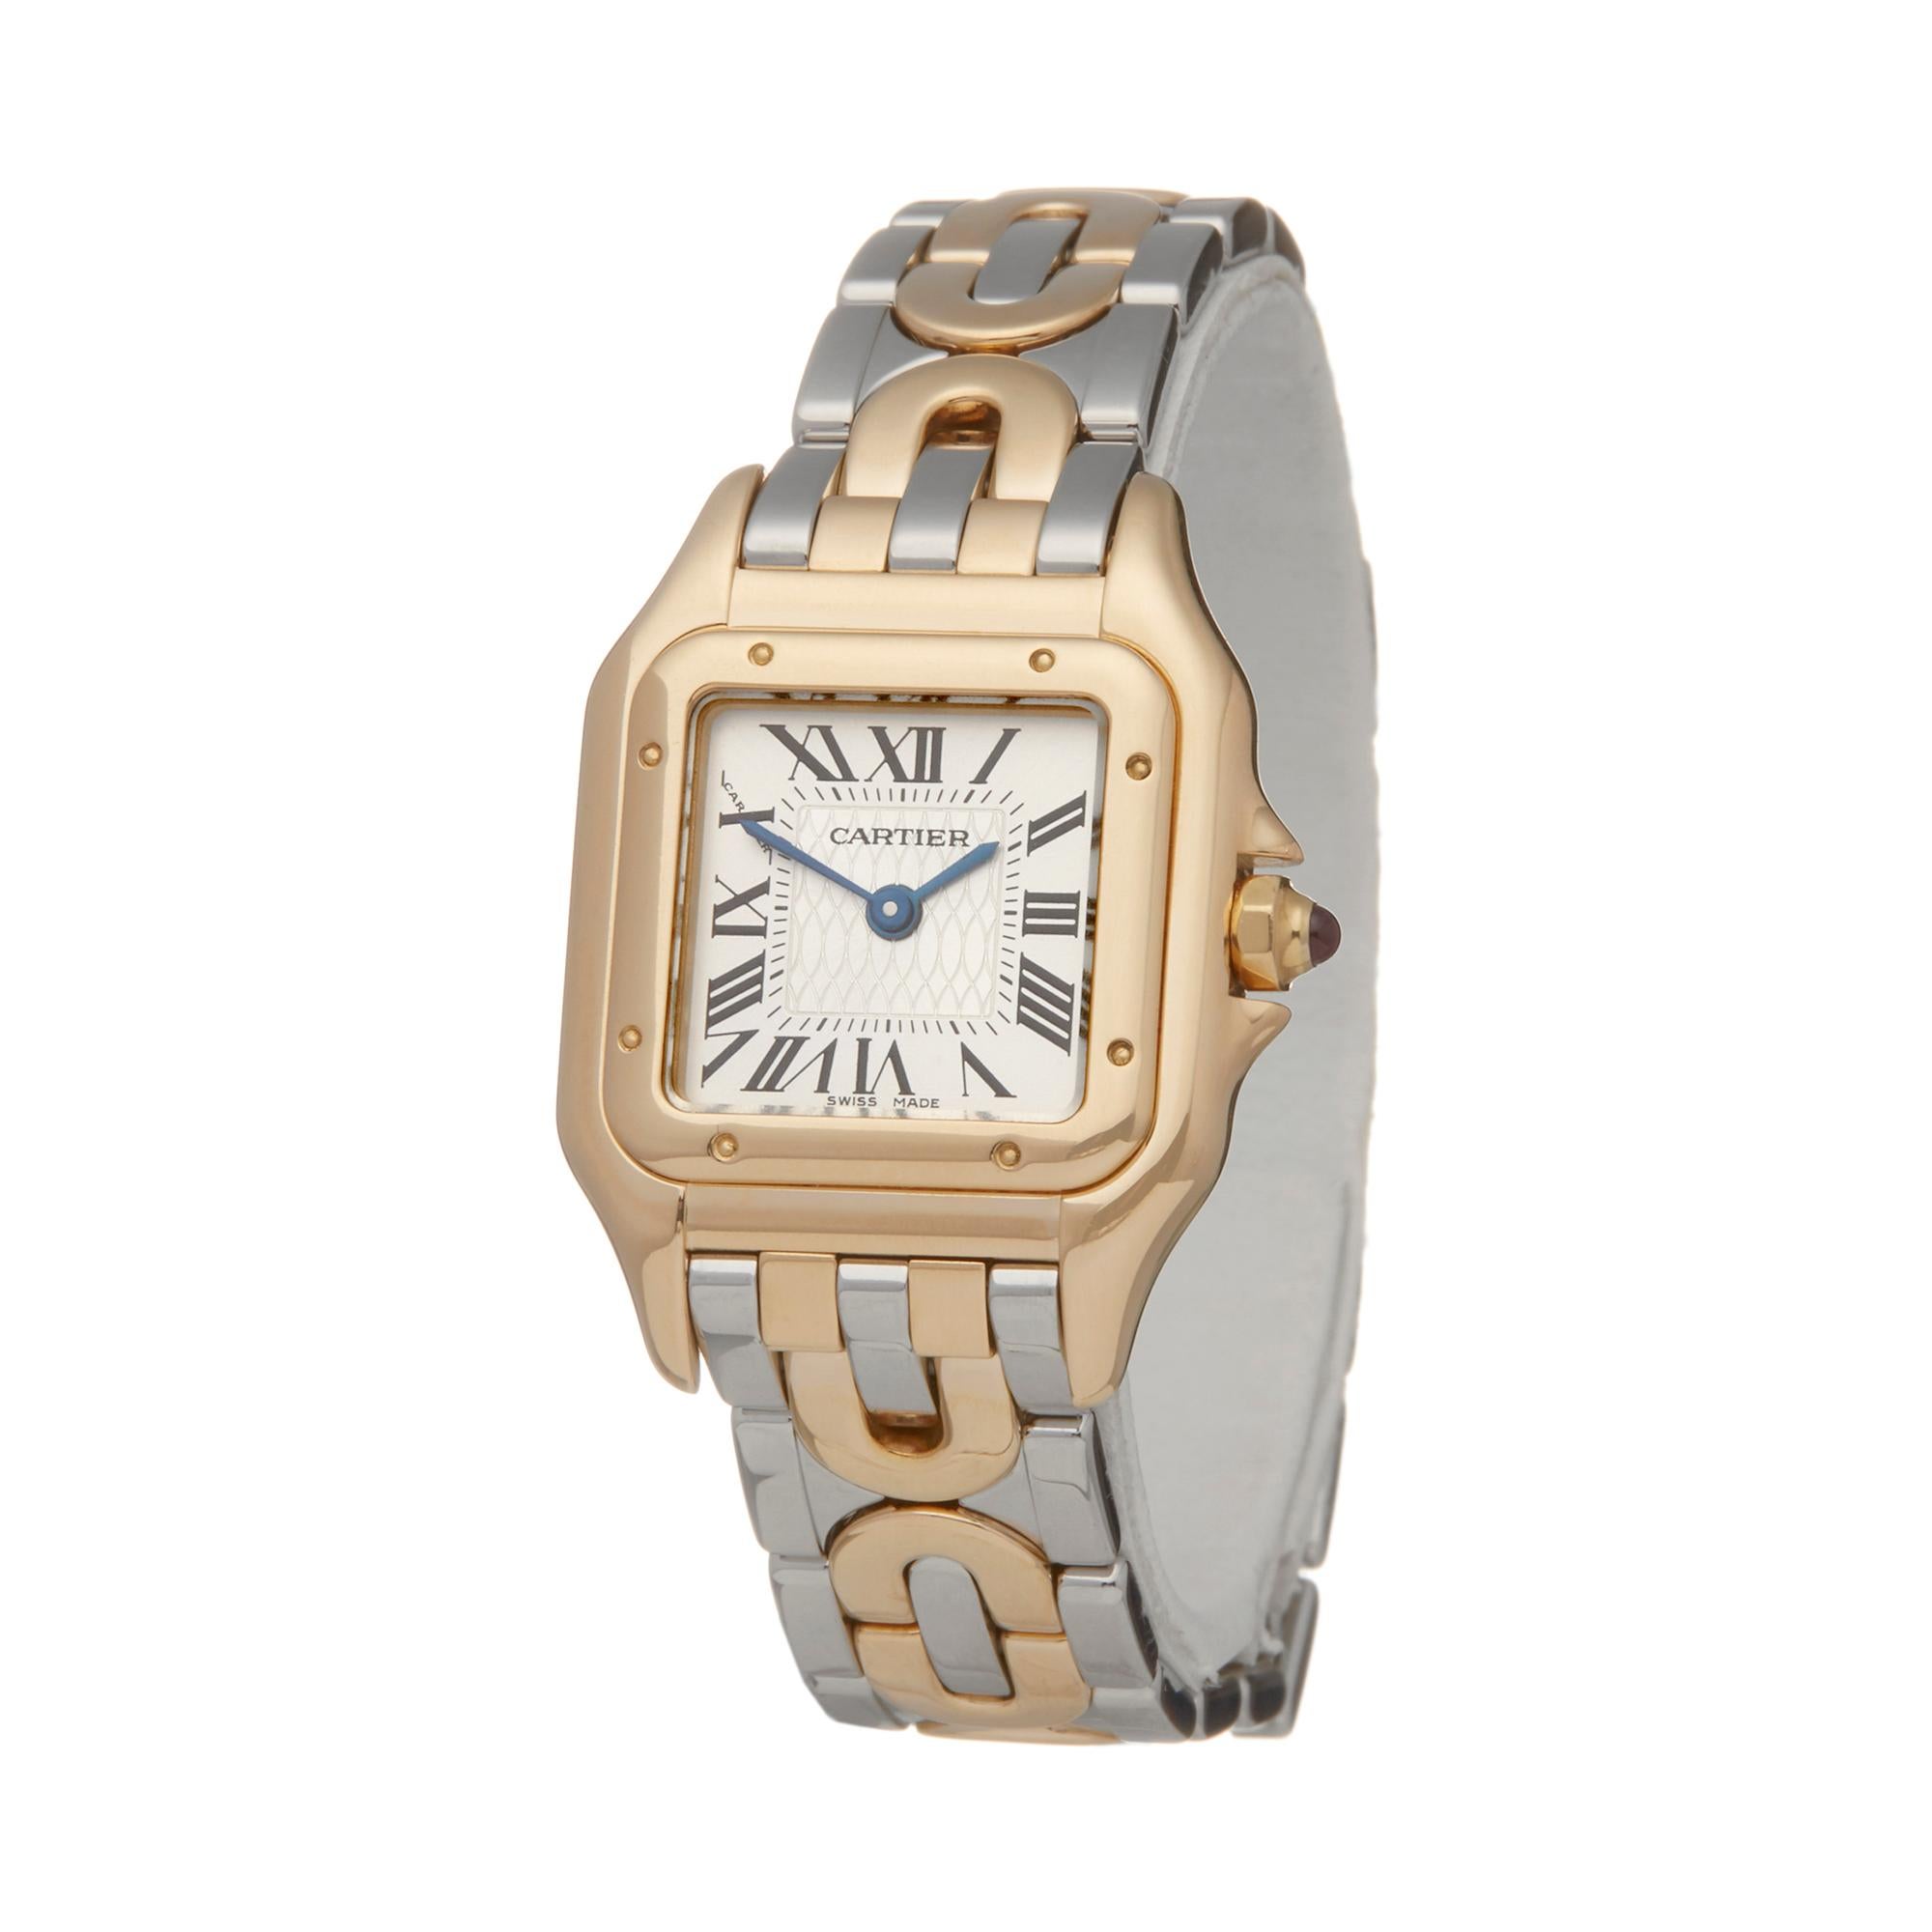 Reference: W5953
Manufacturer: Cartier
Model: Panthère
Age: Circa 1997
Gender: Women's
Box and Papers: Box and Service Papers
Dial: White Roman
Glass: Sapphire Crystal
Movement: Quartz
Water Resistance: To Manufacturers Specifications
Case: 18K